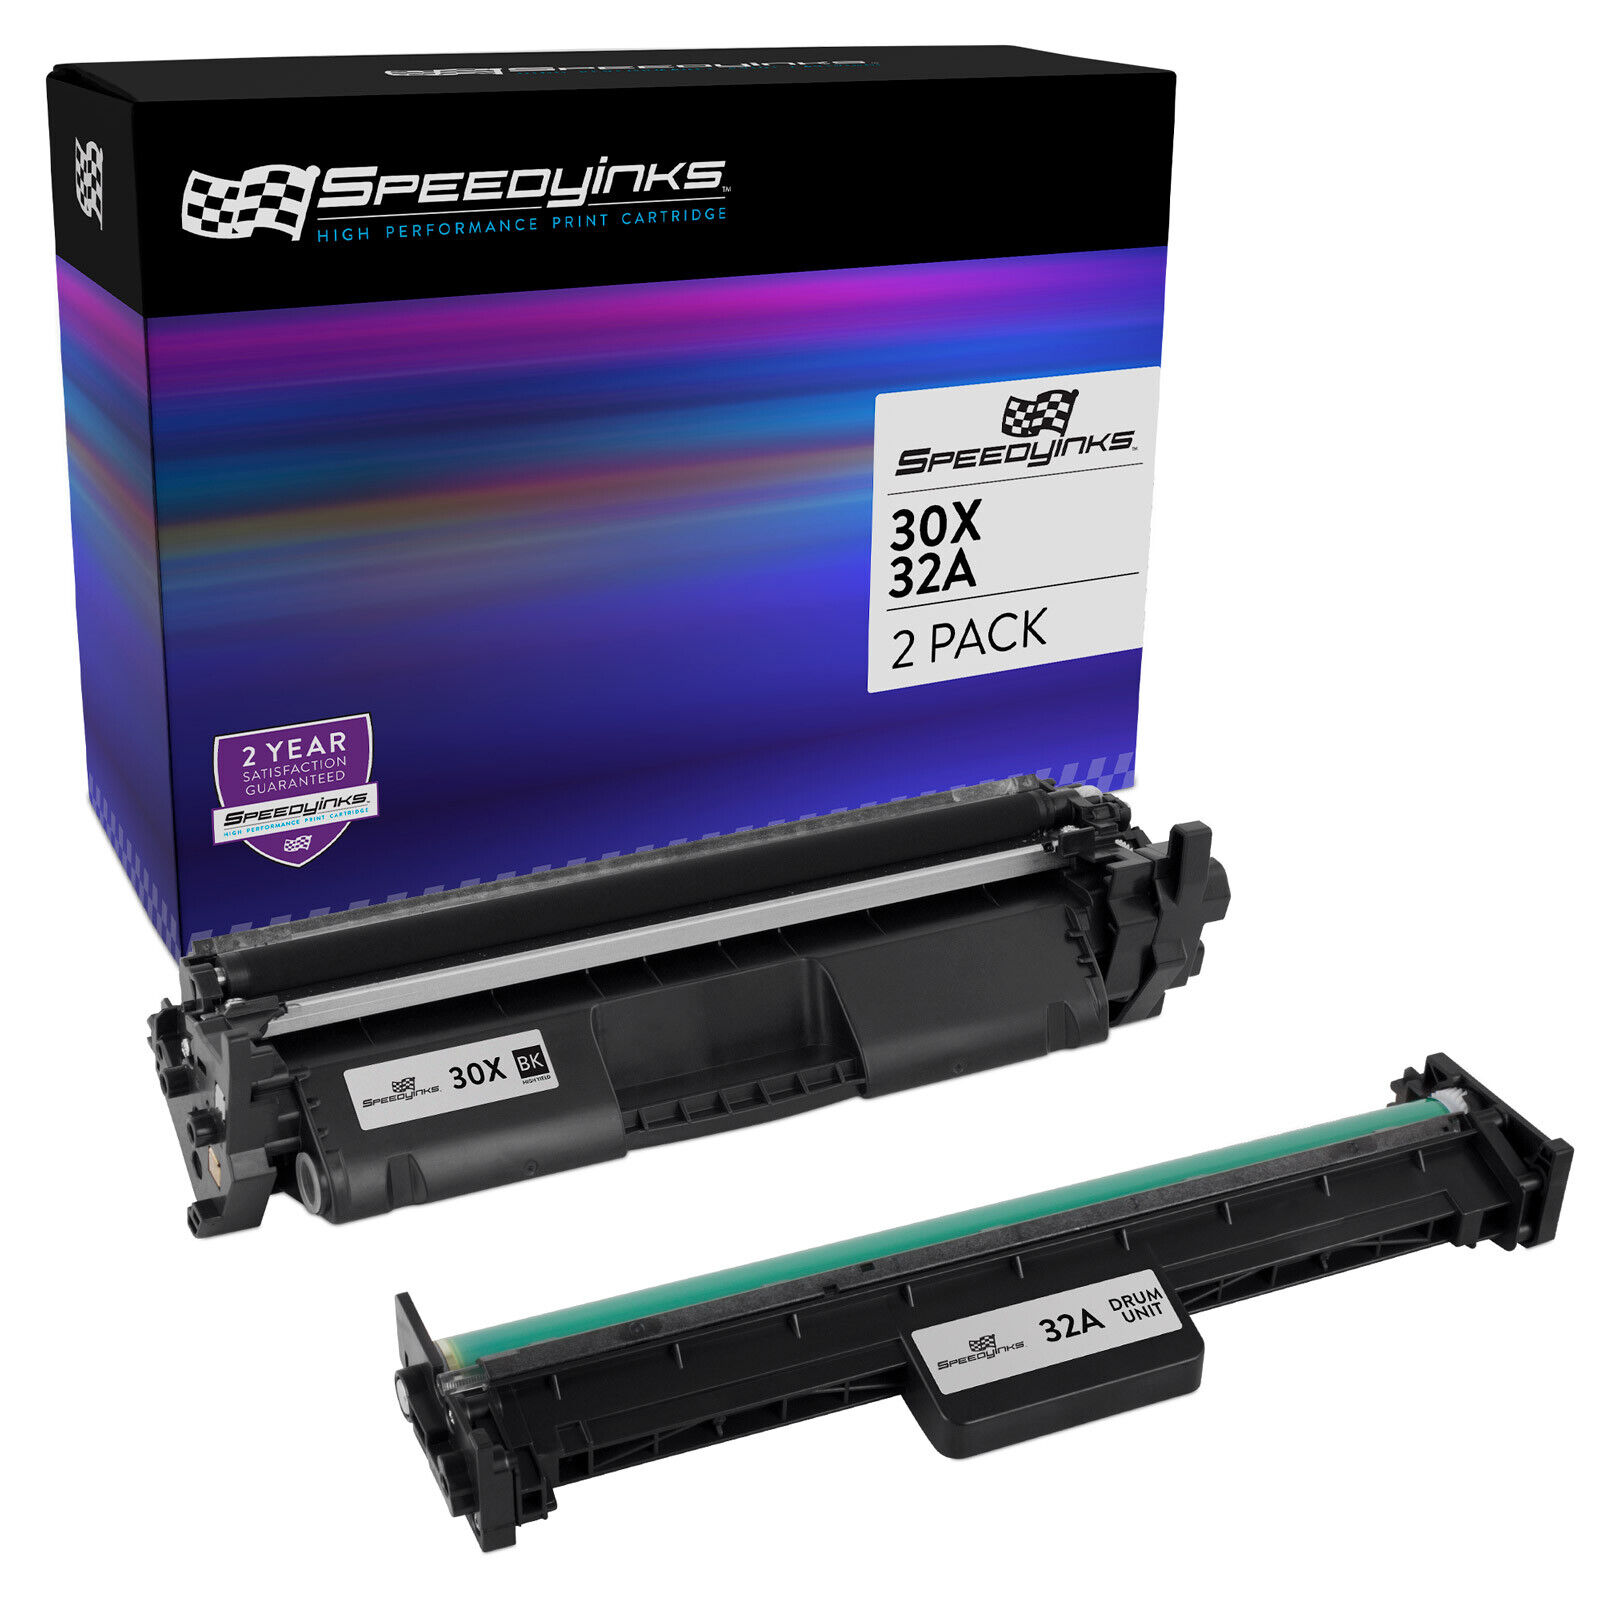 2PK Replacement for HP 30X CF230X Black Toner & 32A CF232A Drum for M203dw